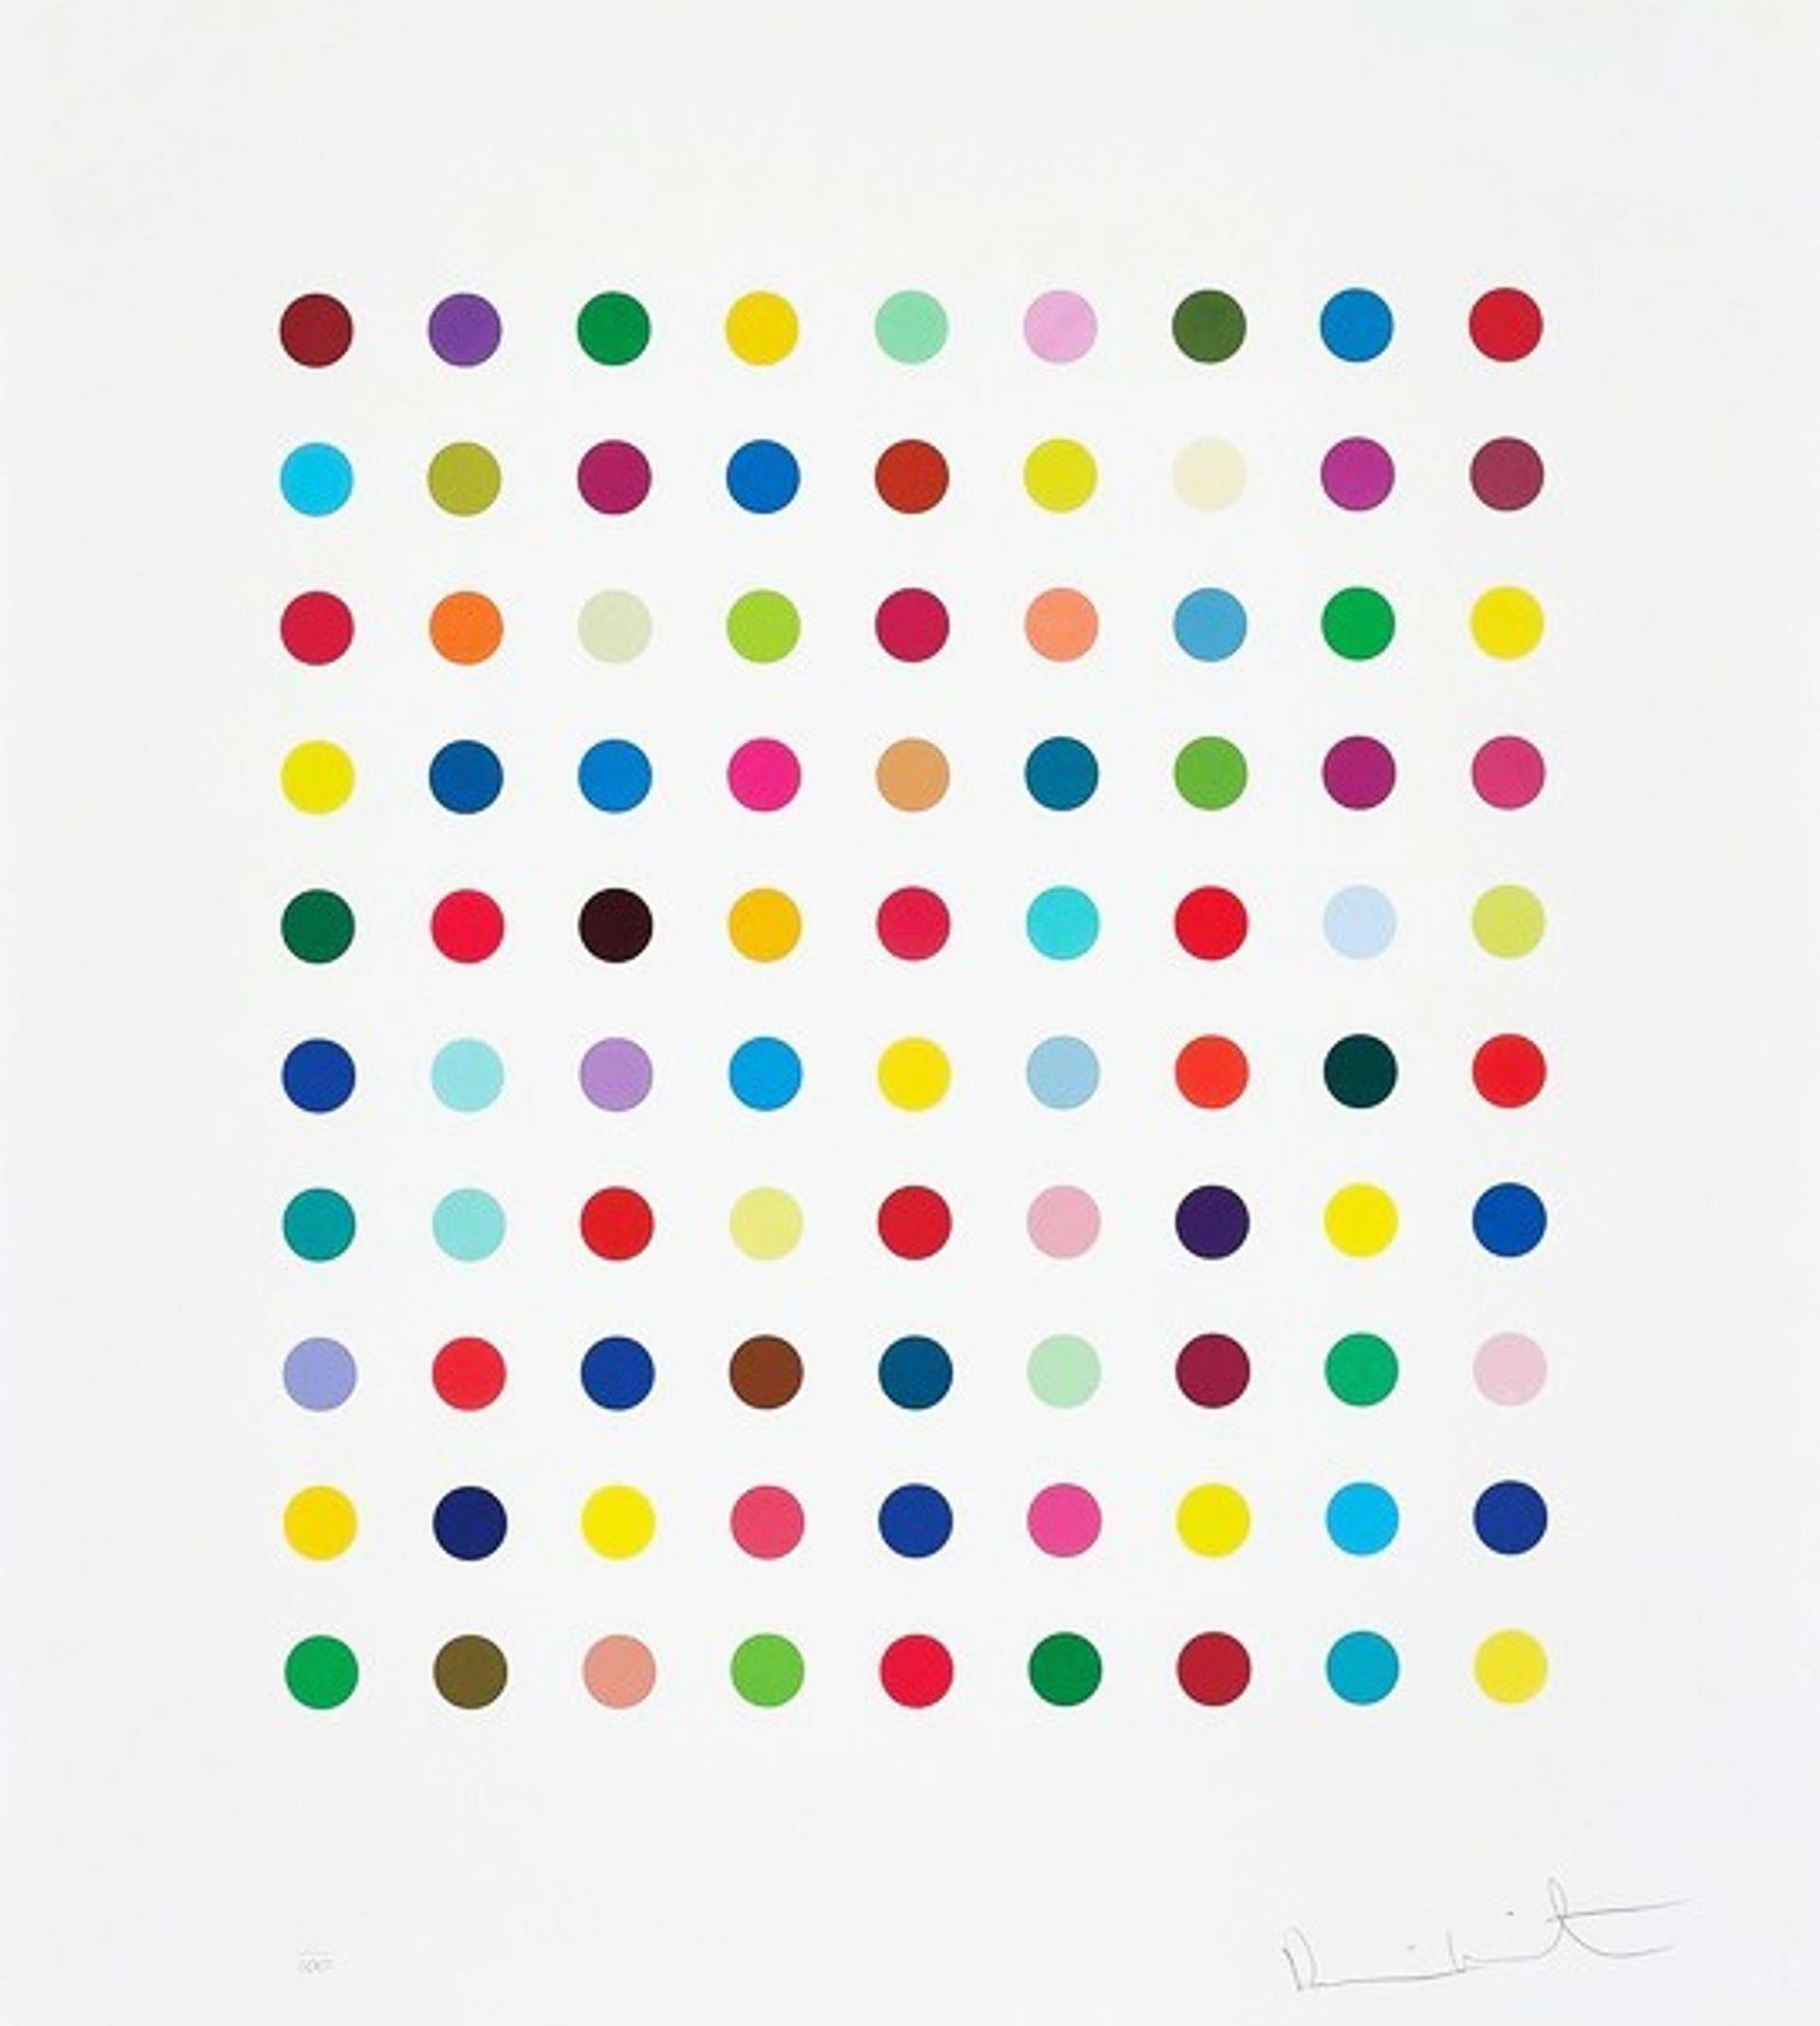 Damien Hirst’s Lanatoside B. A Collection of multicoloured spots in a pattern that make a square